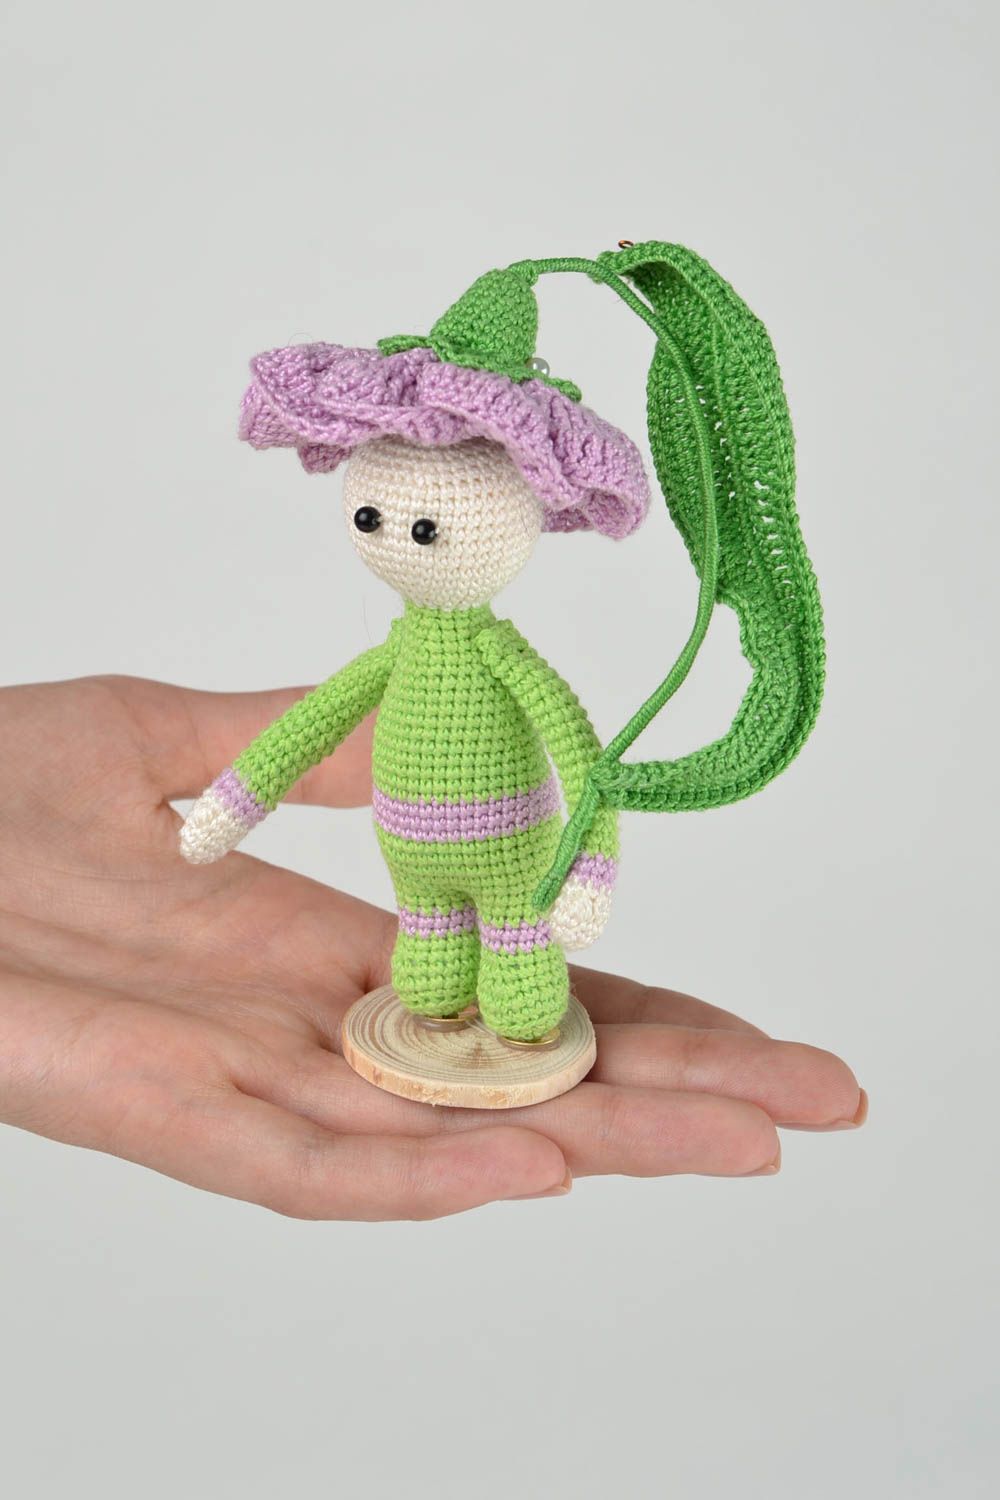 Handmade toy designer toy gift for baby crochet toy gift ideas baby toy photo 5